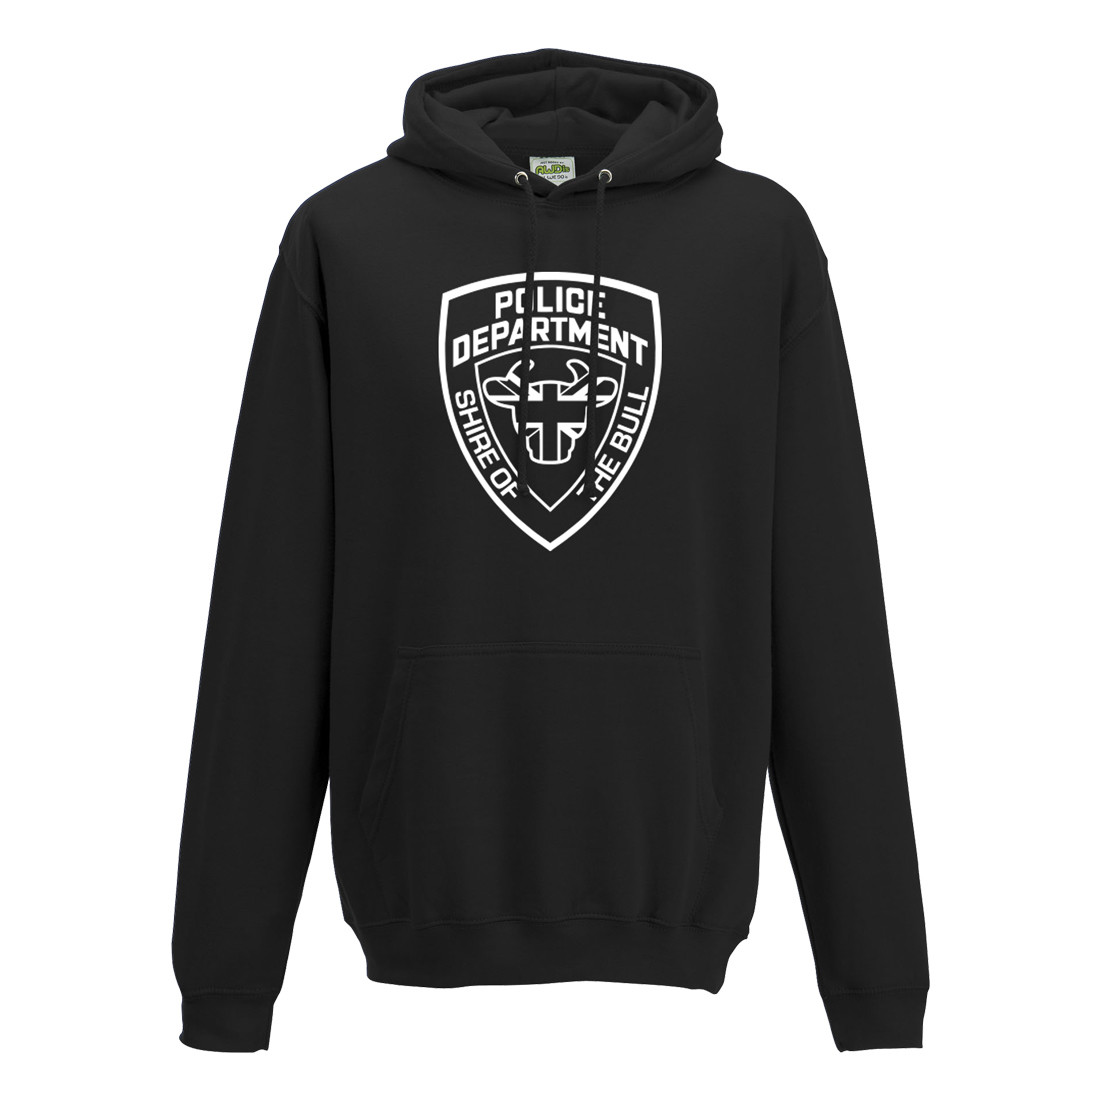 Project Shield: Unisex Hooded Top